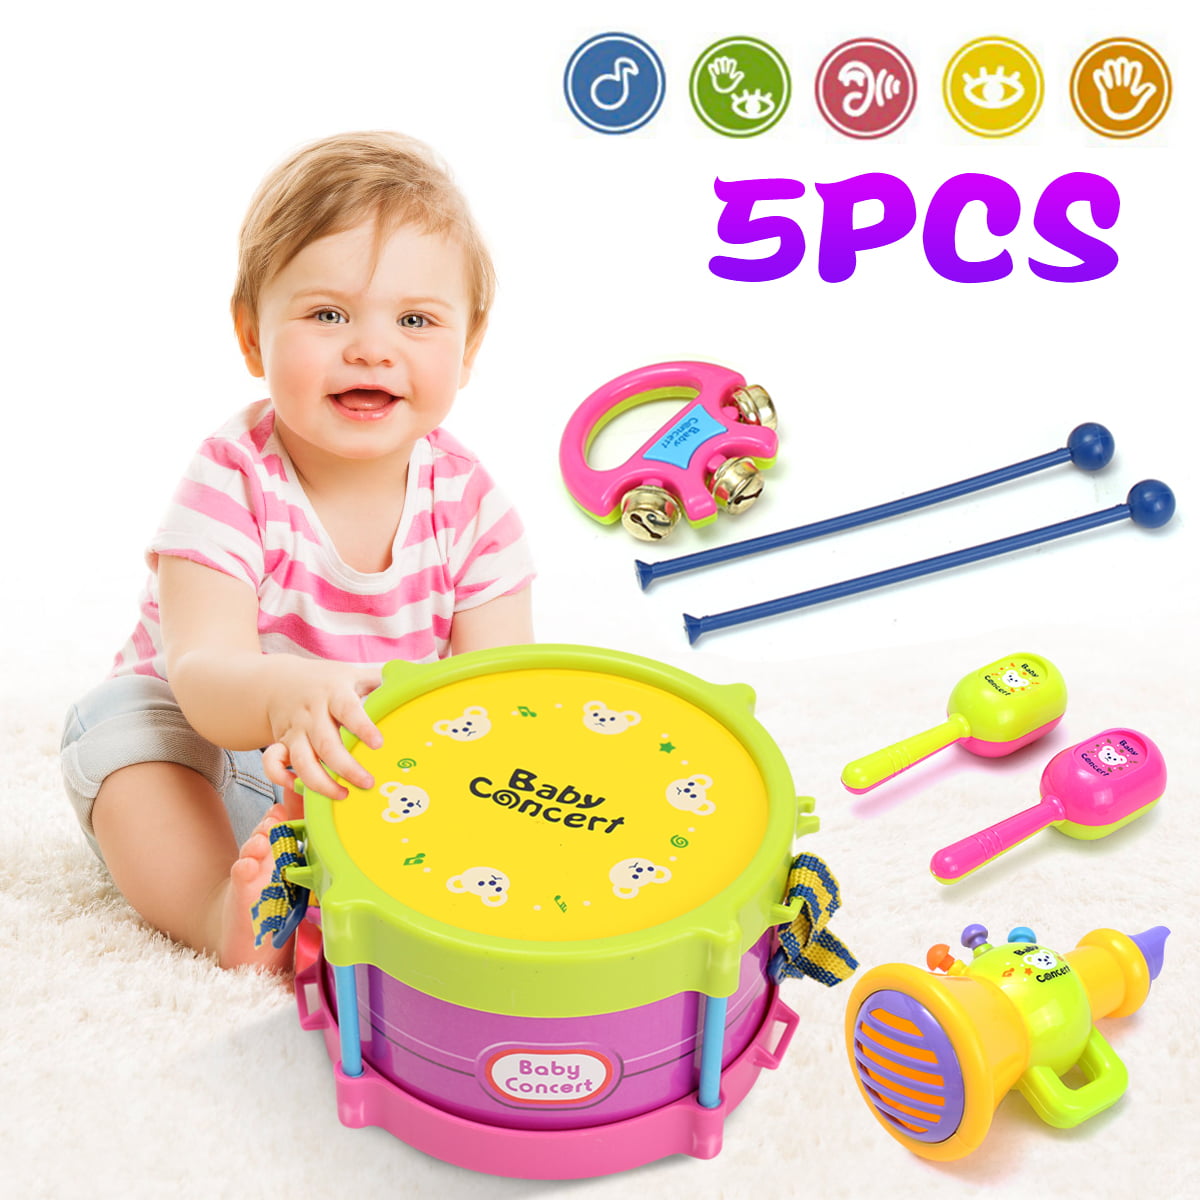 5pcs Educational Baby Kid Roll Drum Musical Instruments Band Kit Toy Gift Set US 